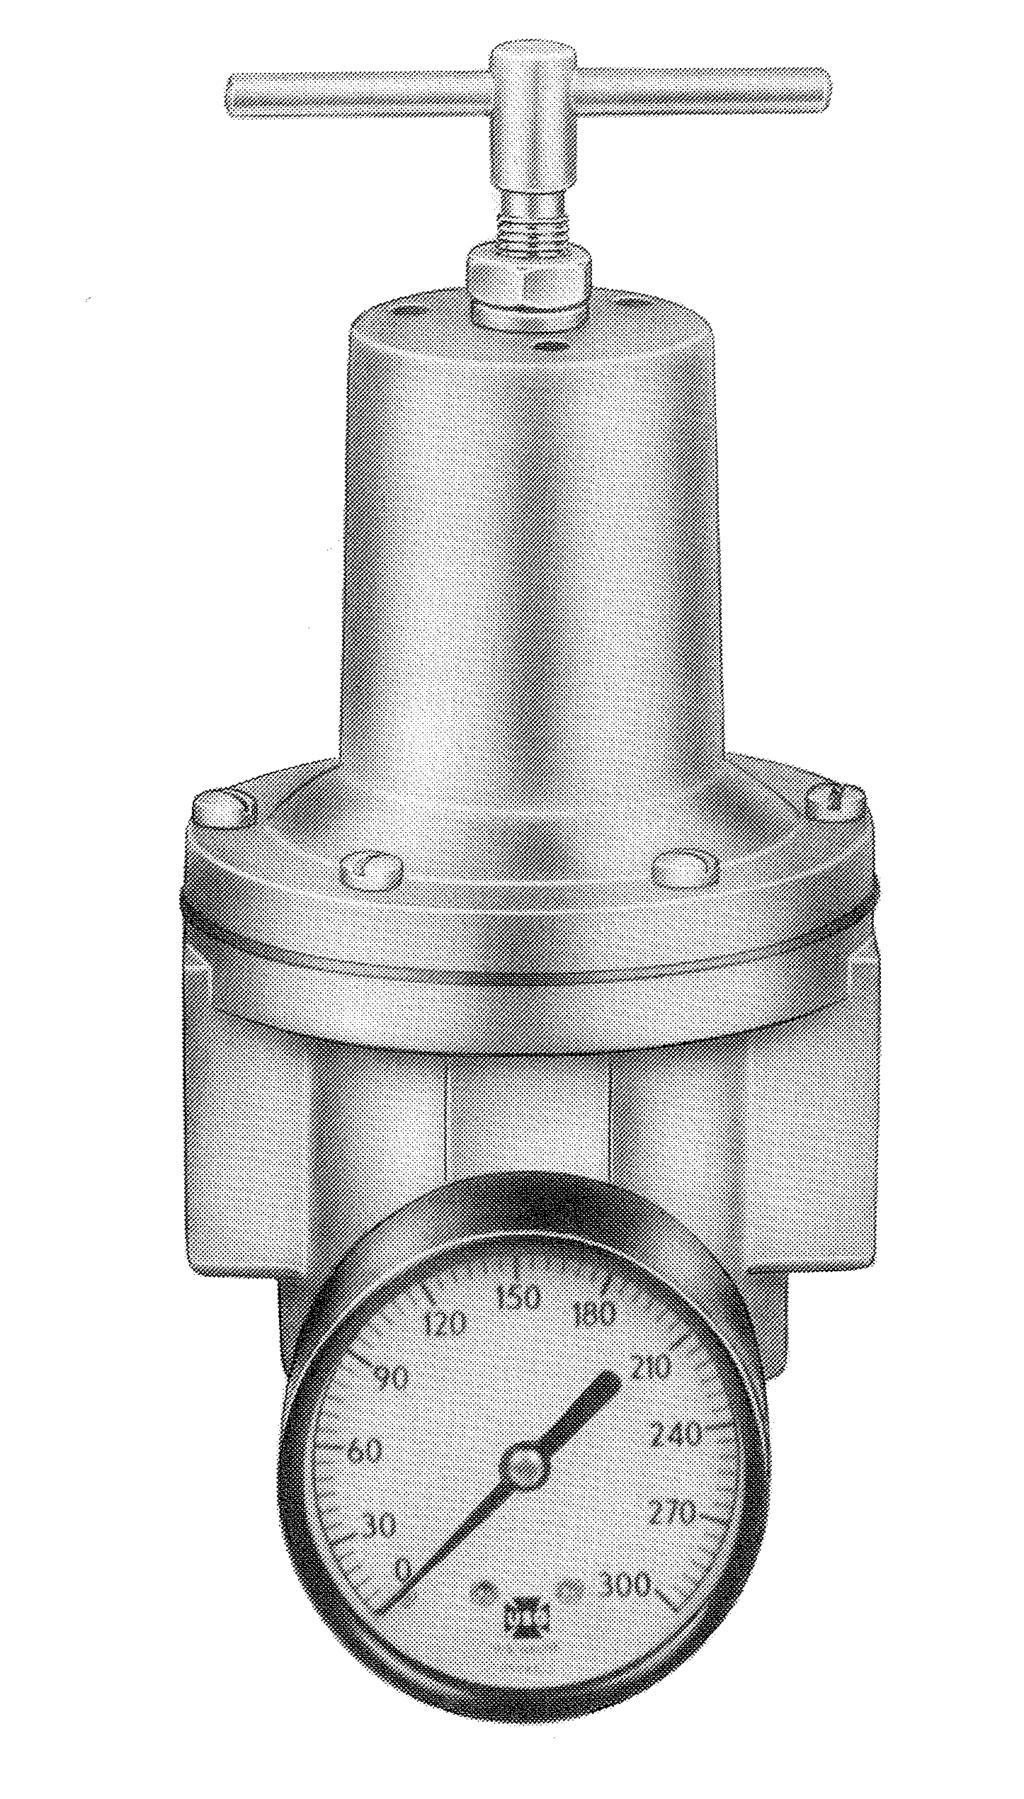 S PRESSURE REGULATOR SERVICE INFORMATION The "S" Pressure Regulator assures uniform air pressure in secondary pneumatic circuits.